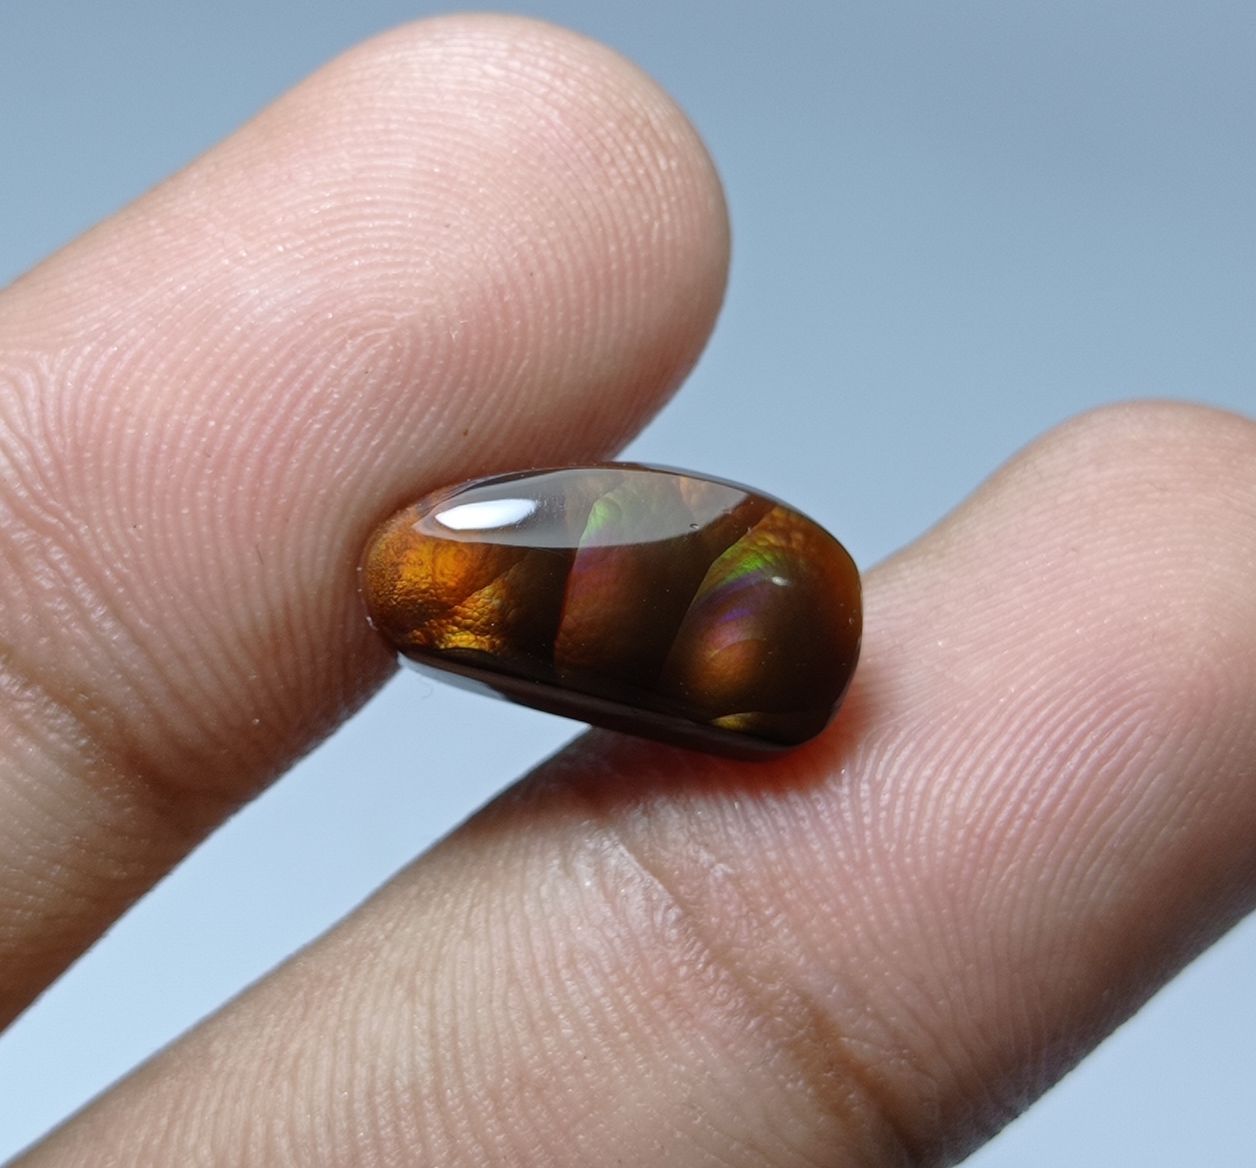 5.7ct Natural Fire Agate - Perfect Gemstone Gift For Gems Lover - Rarer than Diamond, Dimensions 16x8x4.5mm